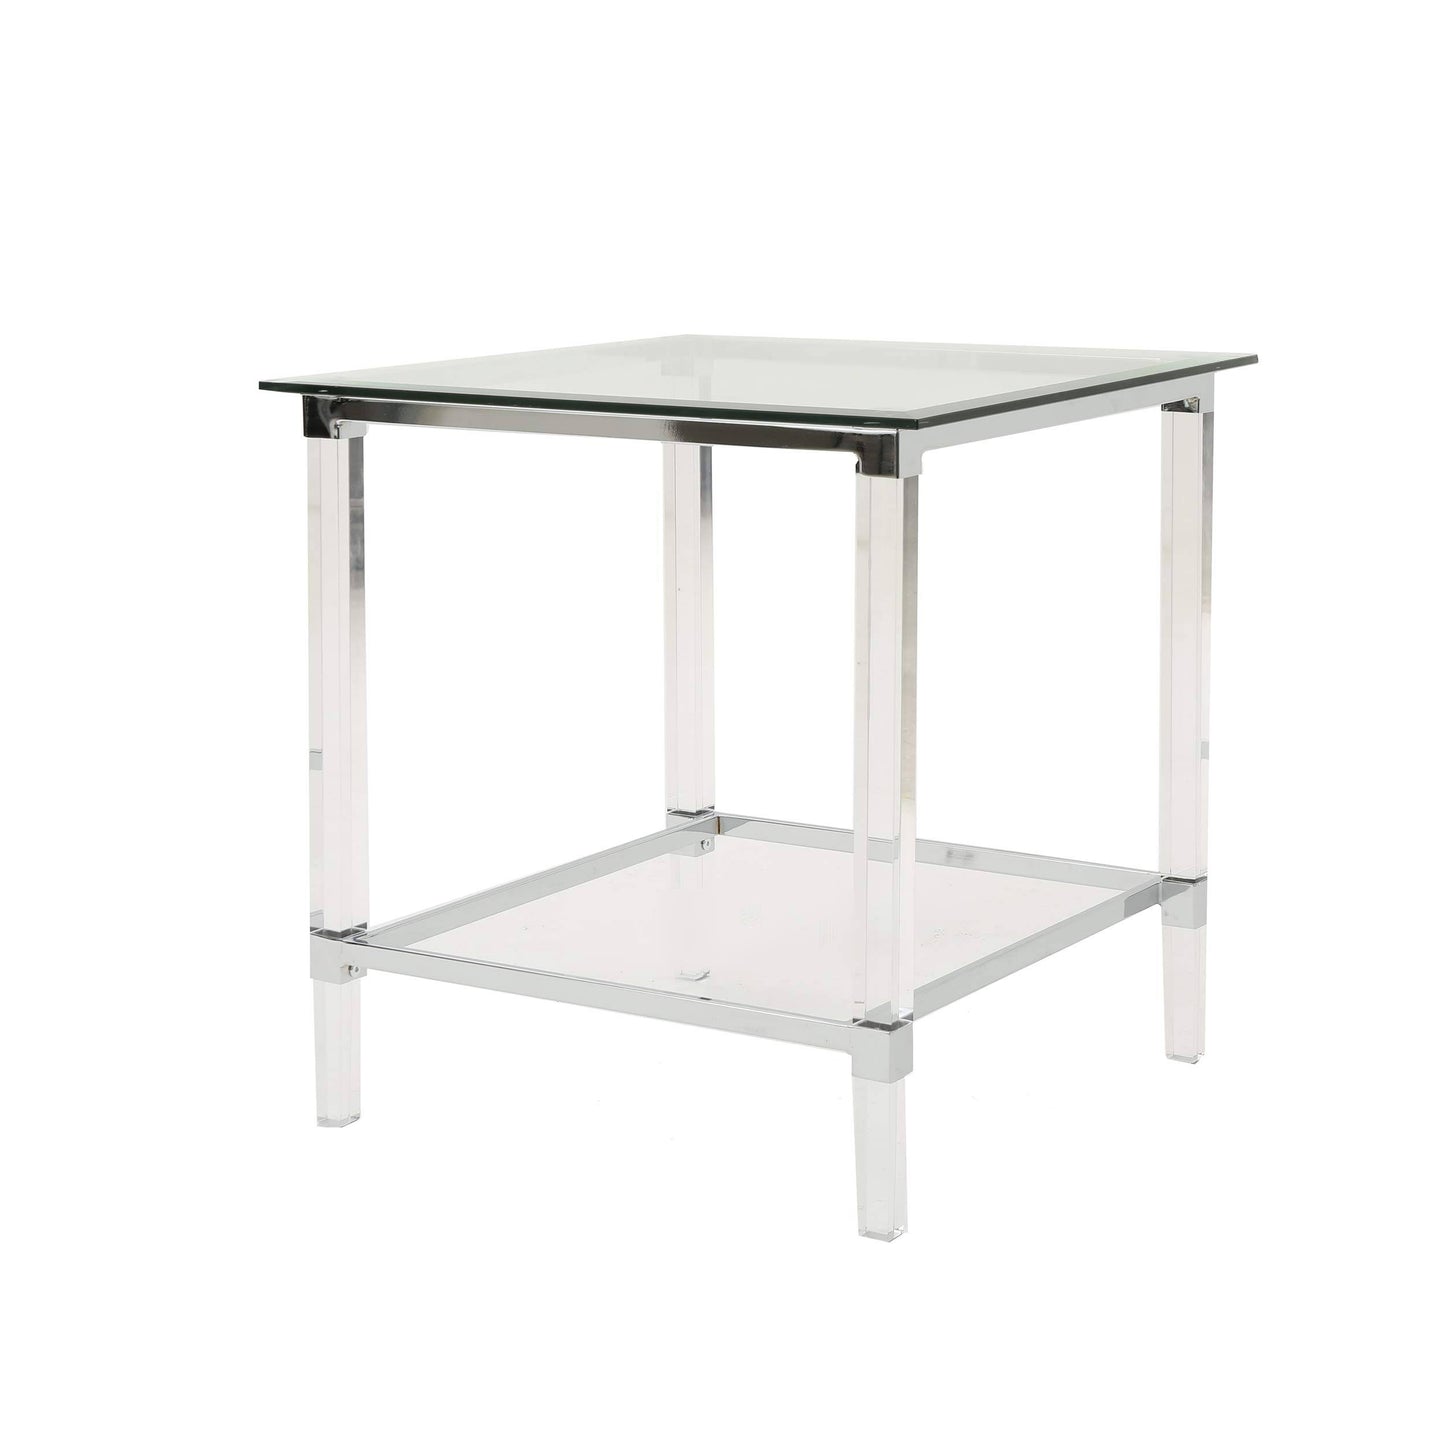 ACRYLIC, CHROME & GLASS CONTEMPORARY ACCENT TABLE